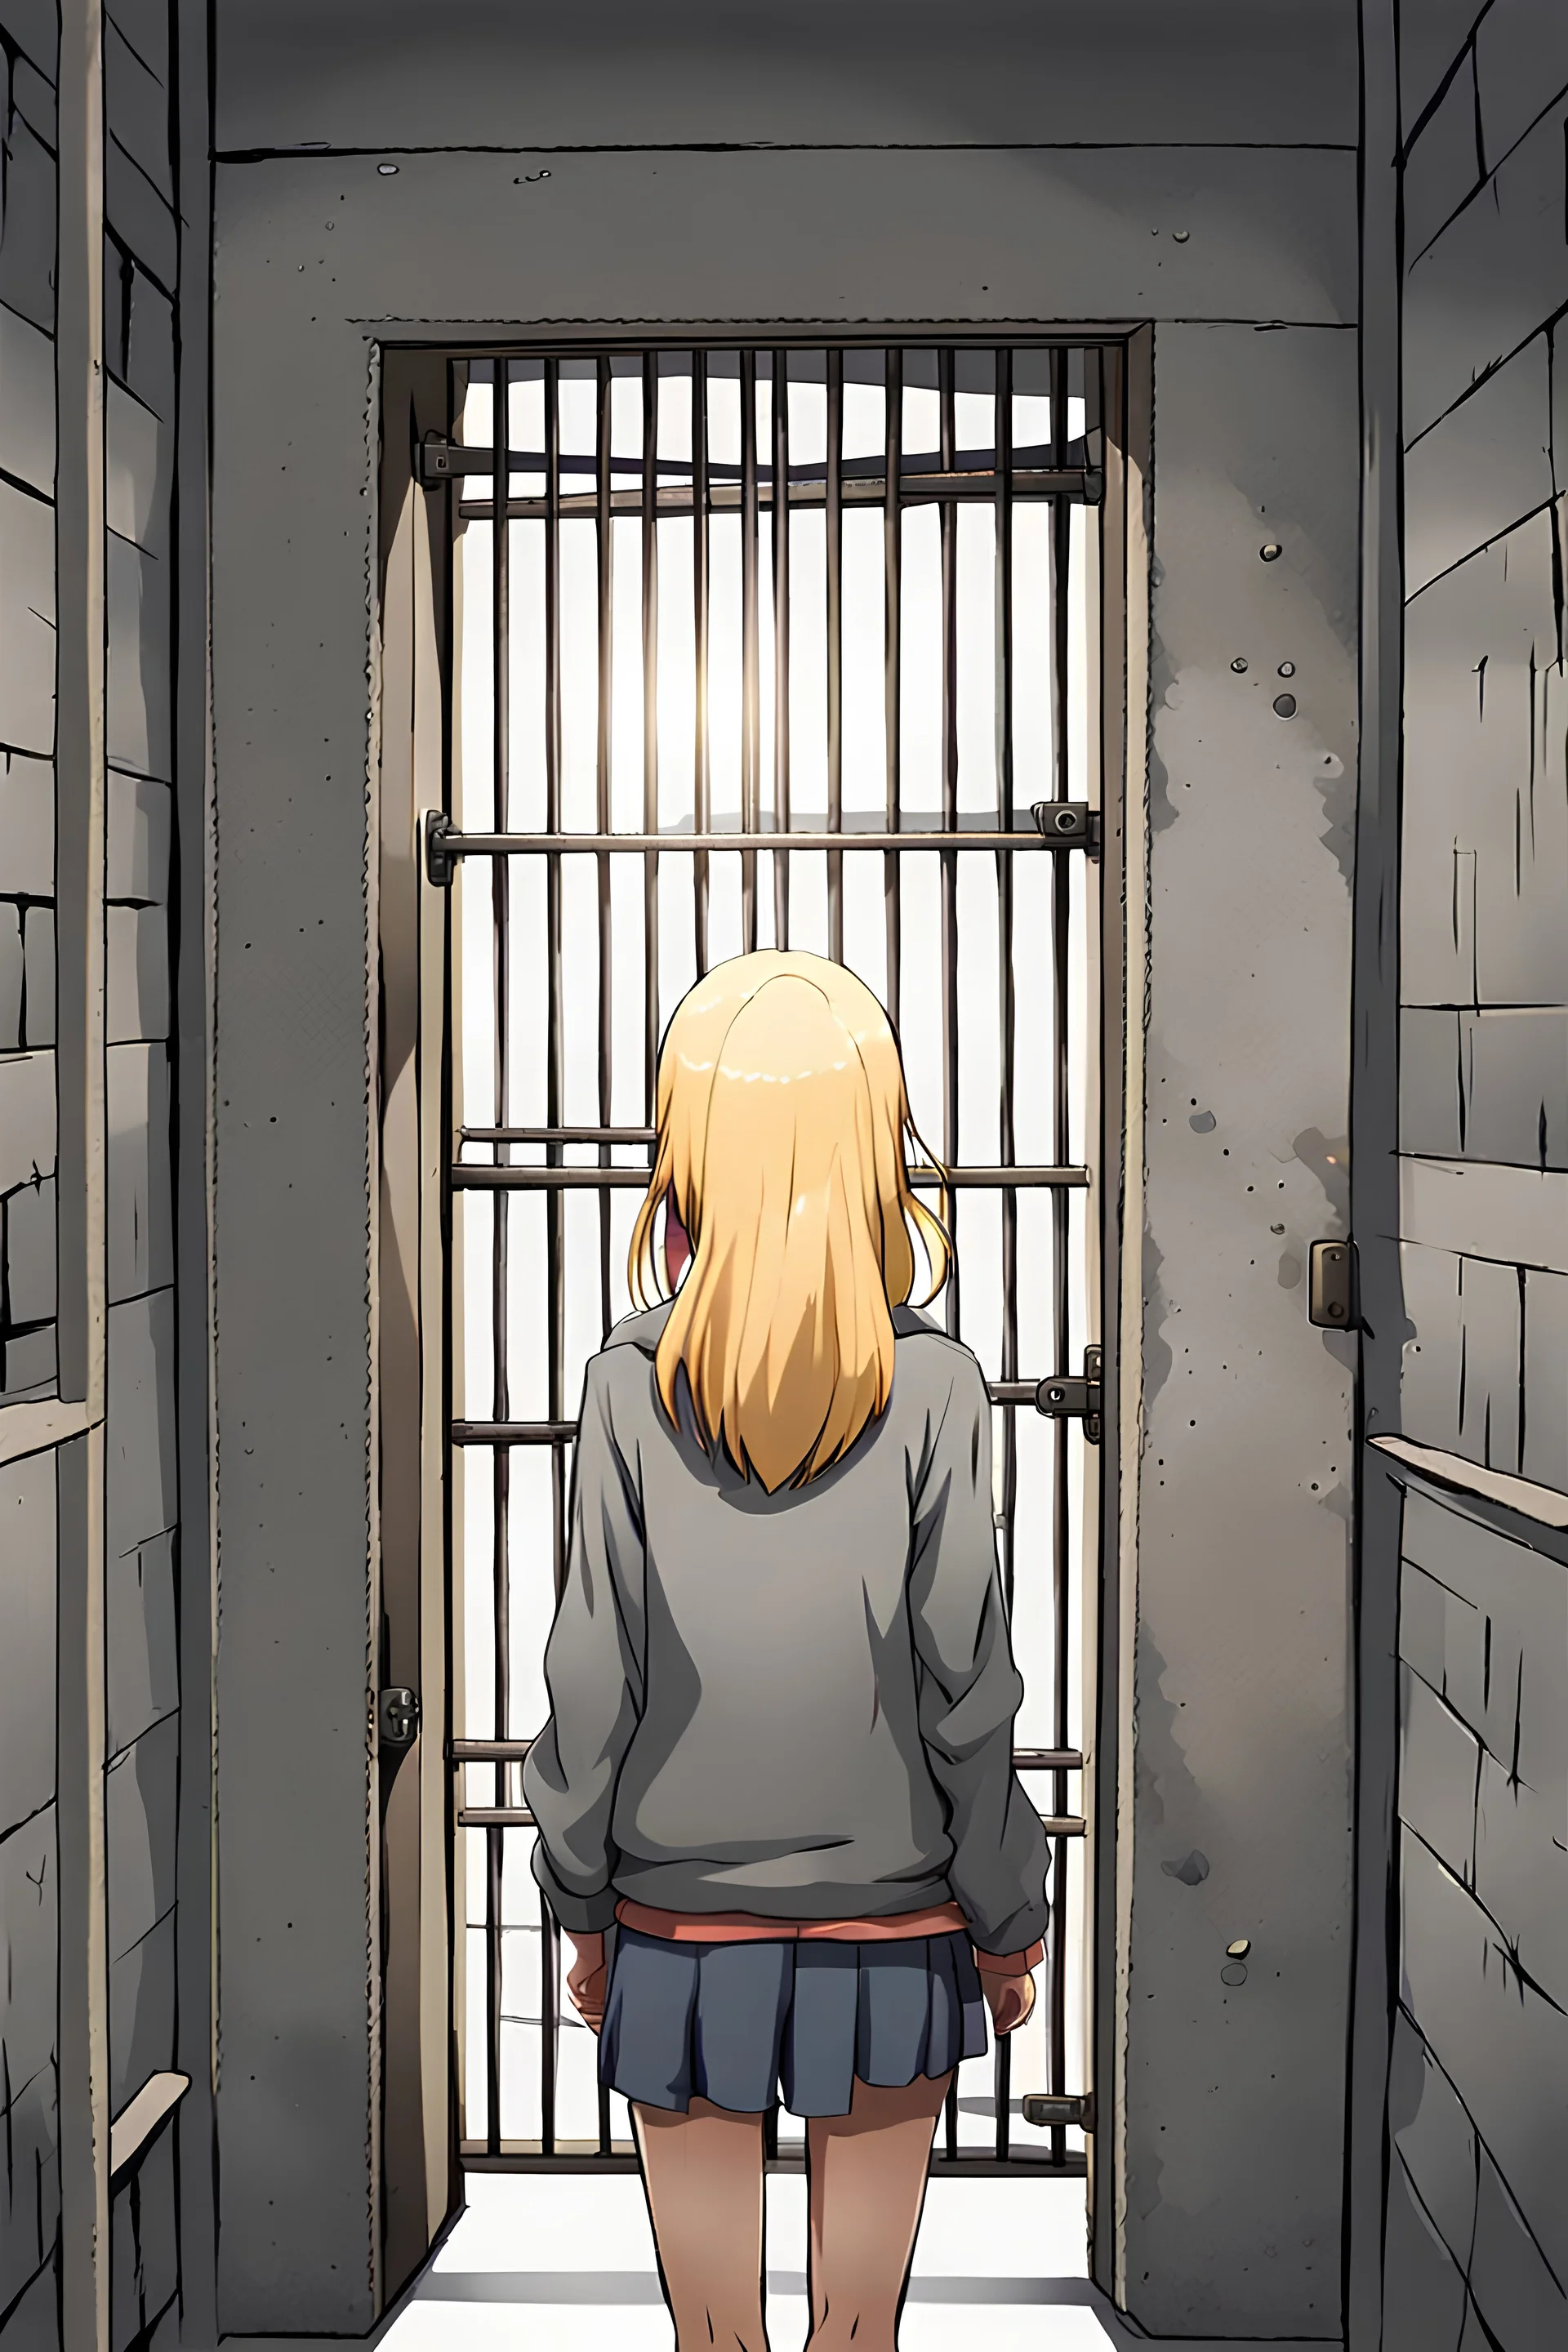 anime style, blonde teenage girl inside a grey concrete prison cell, not facing the viewer, her back is visible, standing near the closed, barred door, there is a corridor behind the barred door, bed and window visible inside the cell, picture taken inside the cell, facing the exit